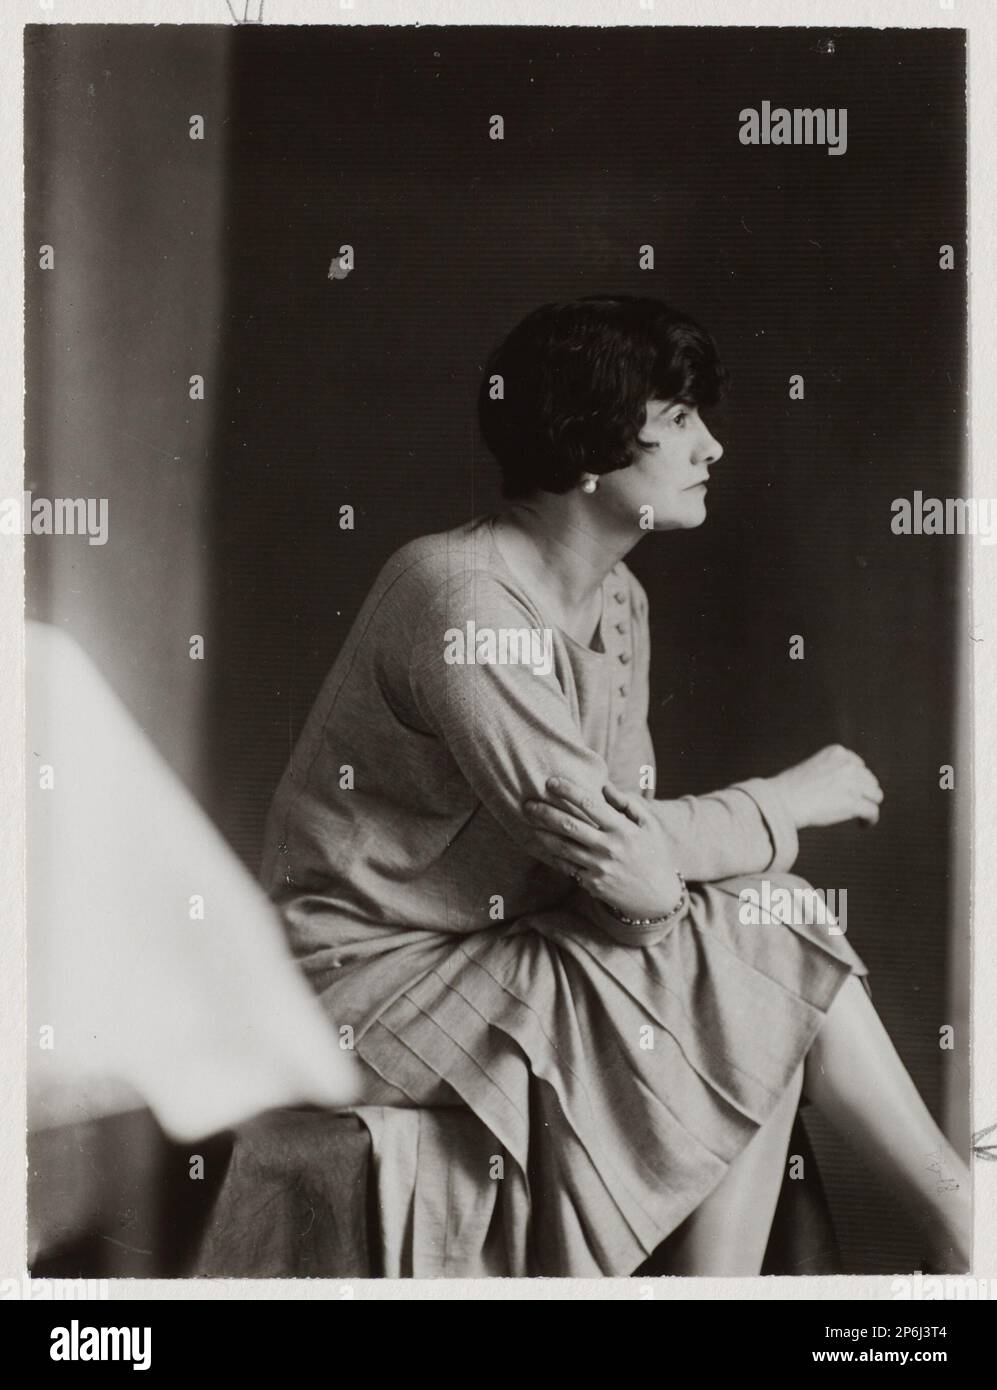 203 Images of Coco Chanel found, art and culture images and photos